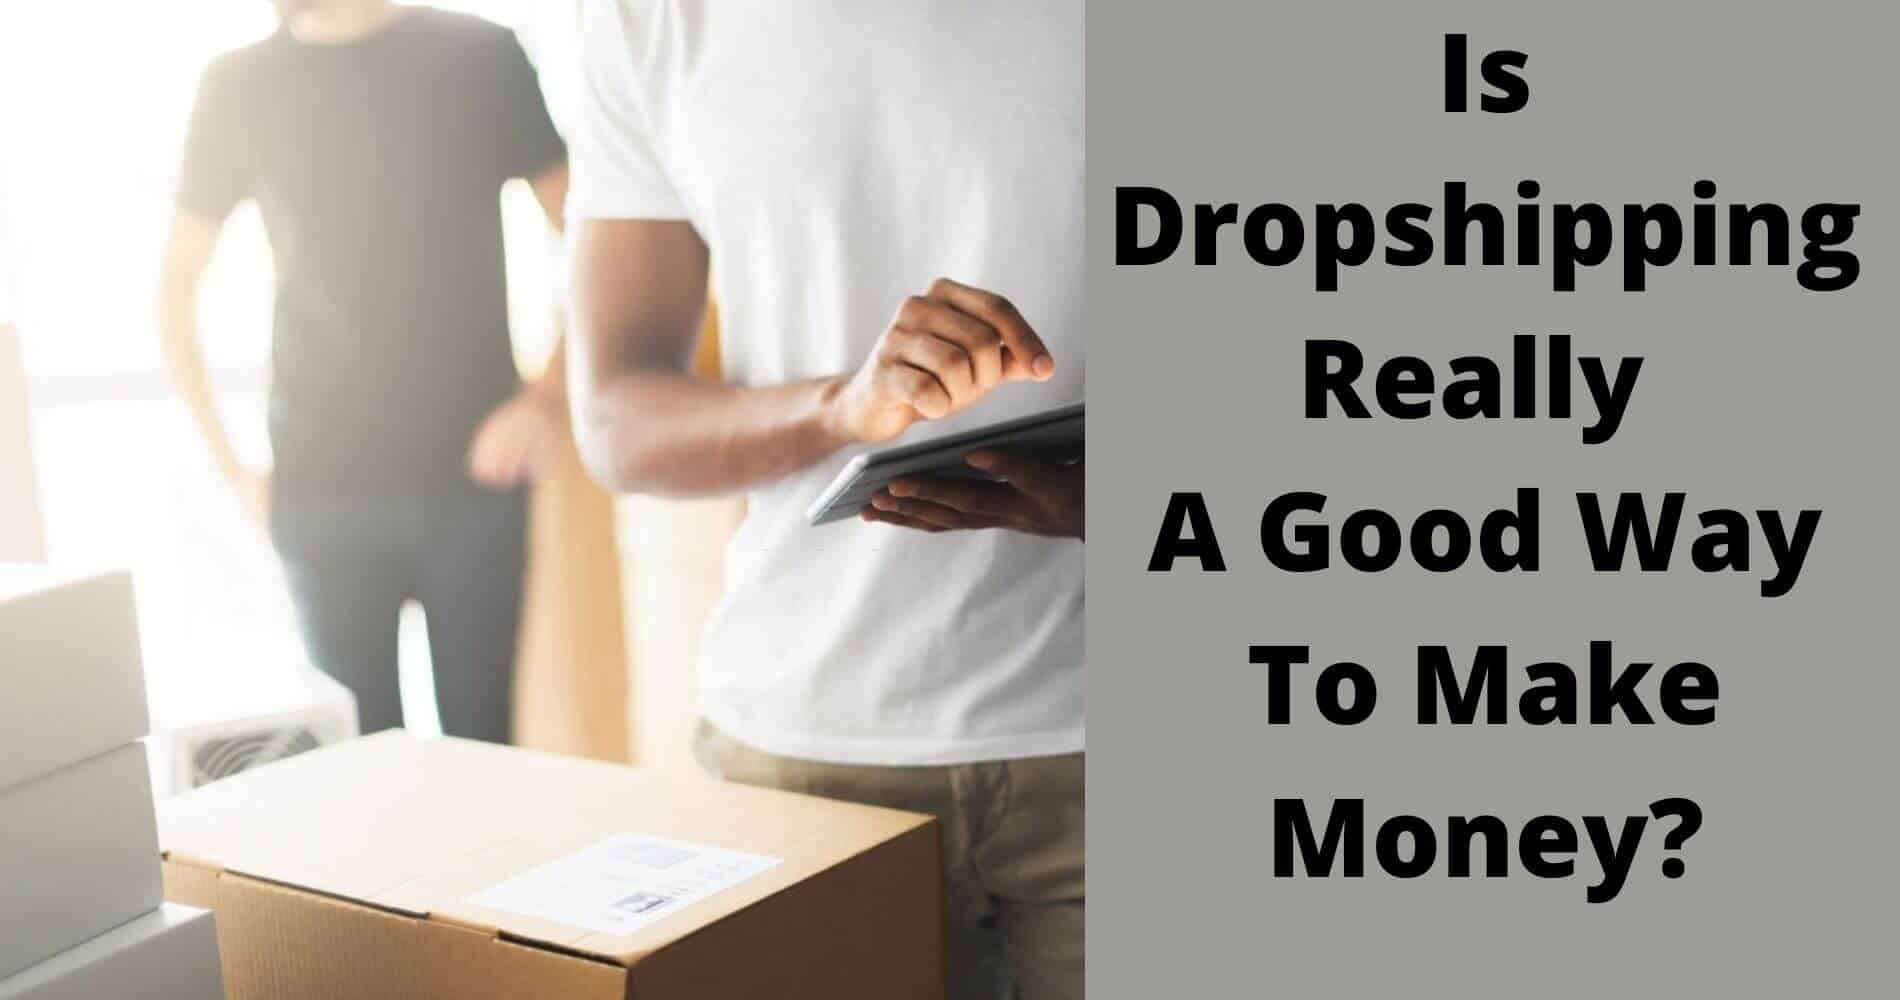 Is Dropshipping Really A Good Way To Make Money